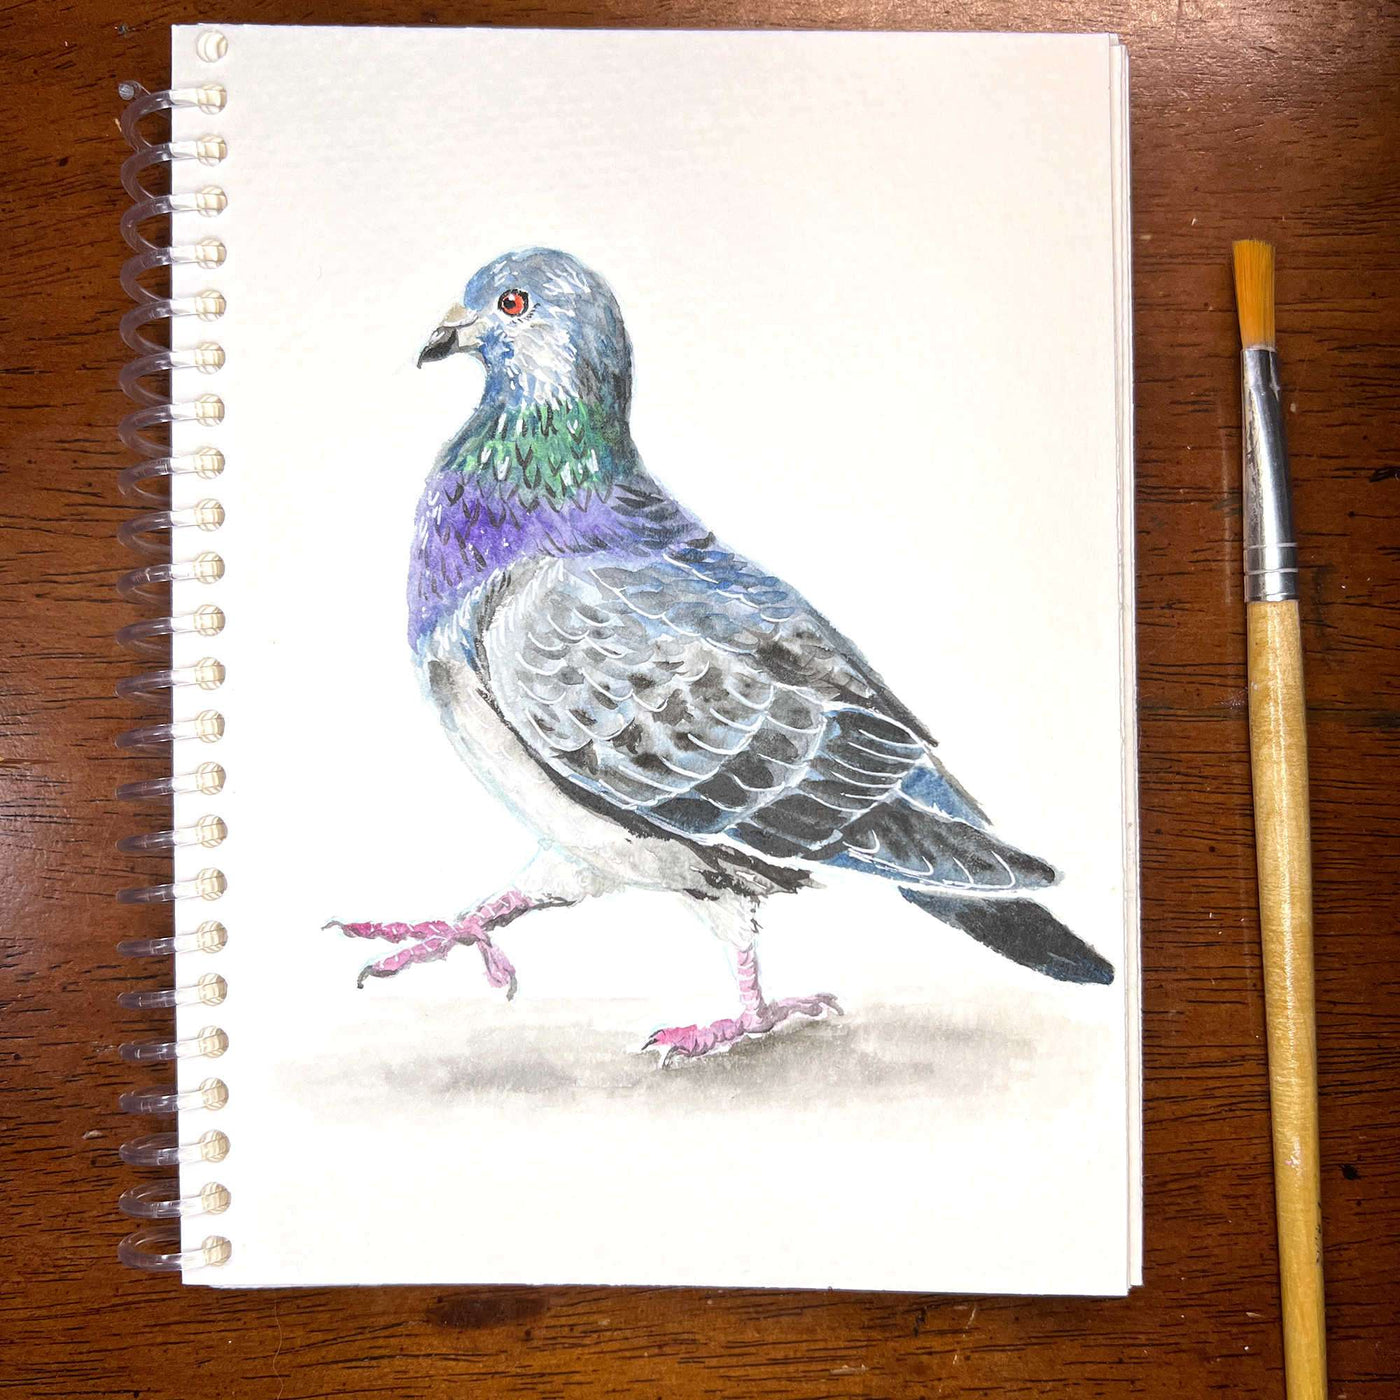 Pigeon/Rooster - Original Watercolor Painting of a pigeon in a sketchbook with a paintbrush lying next to it on a wooden table.